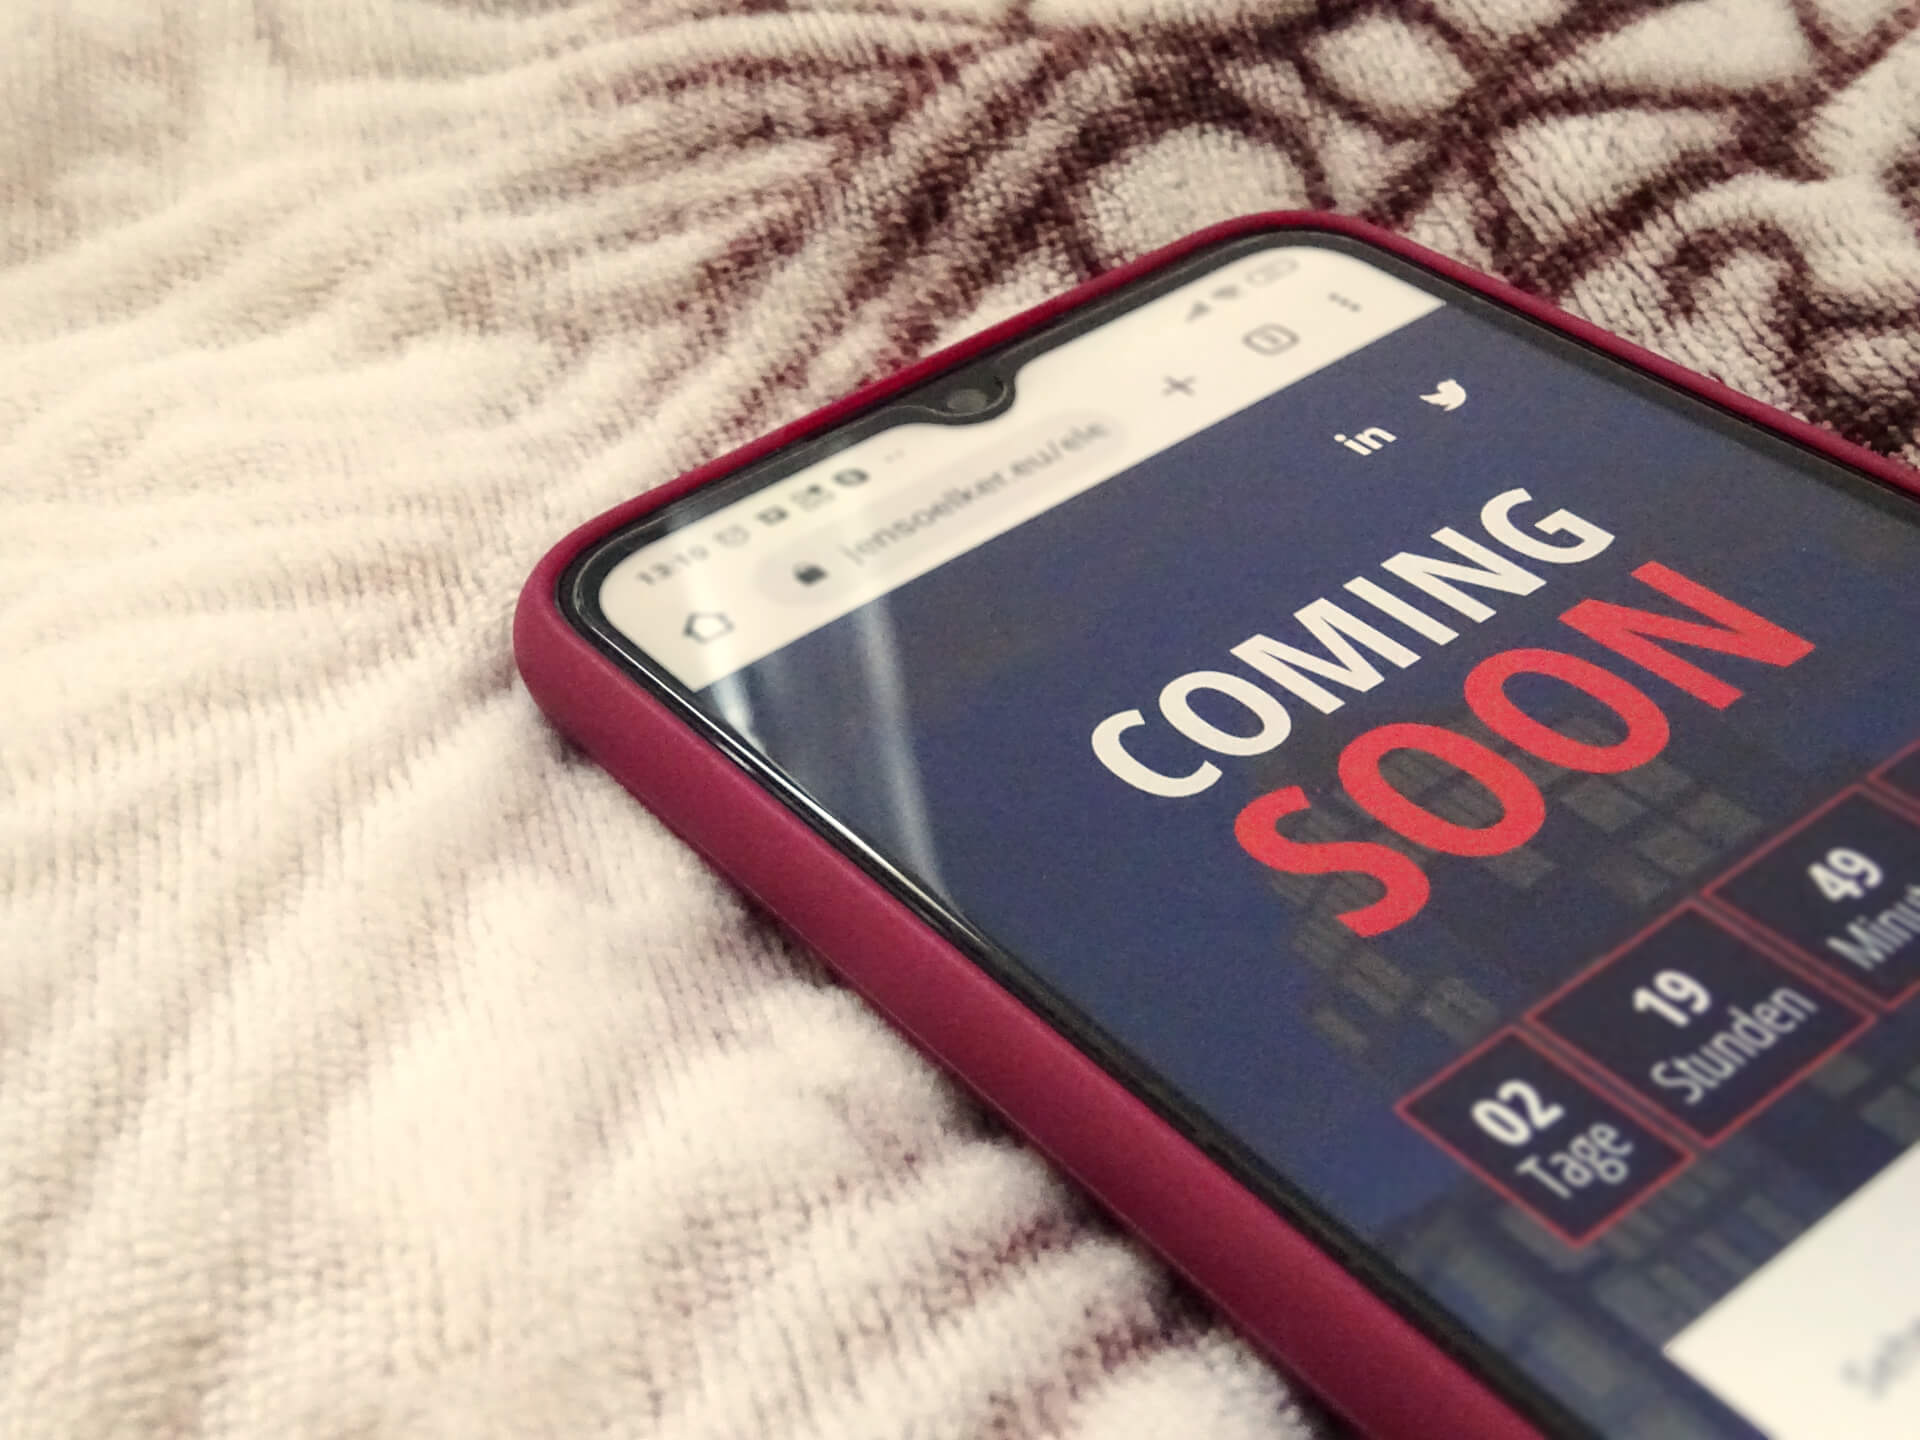 On the image, you see a smartphone lying on a blanket and the screen shows the words "Coming Soon."